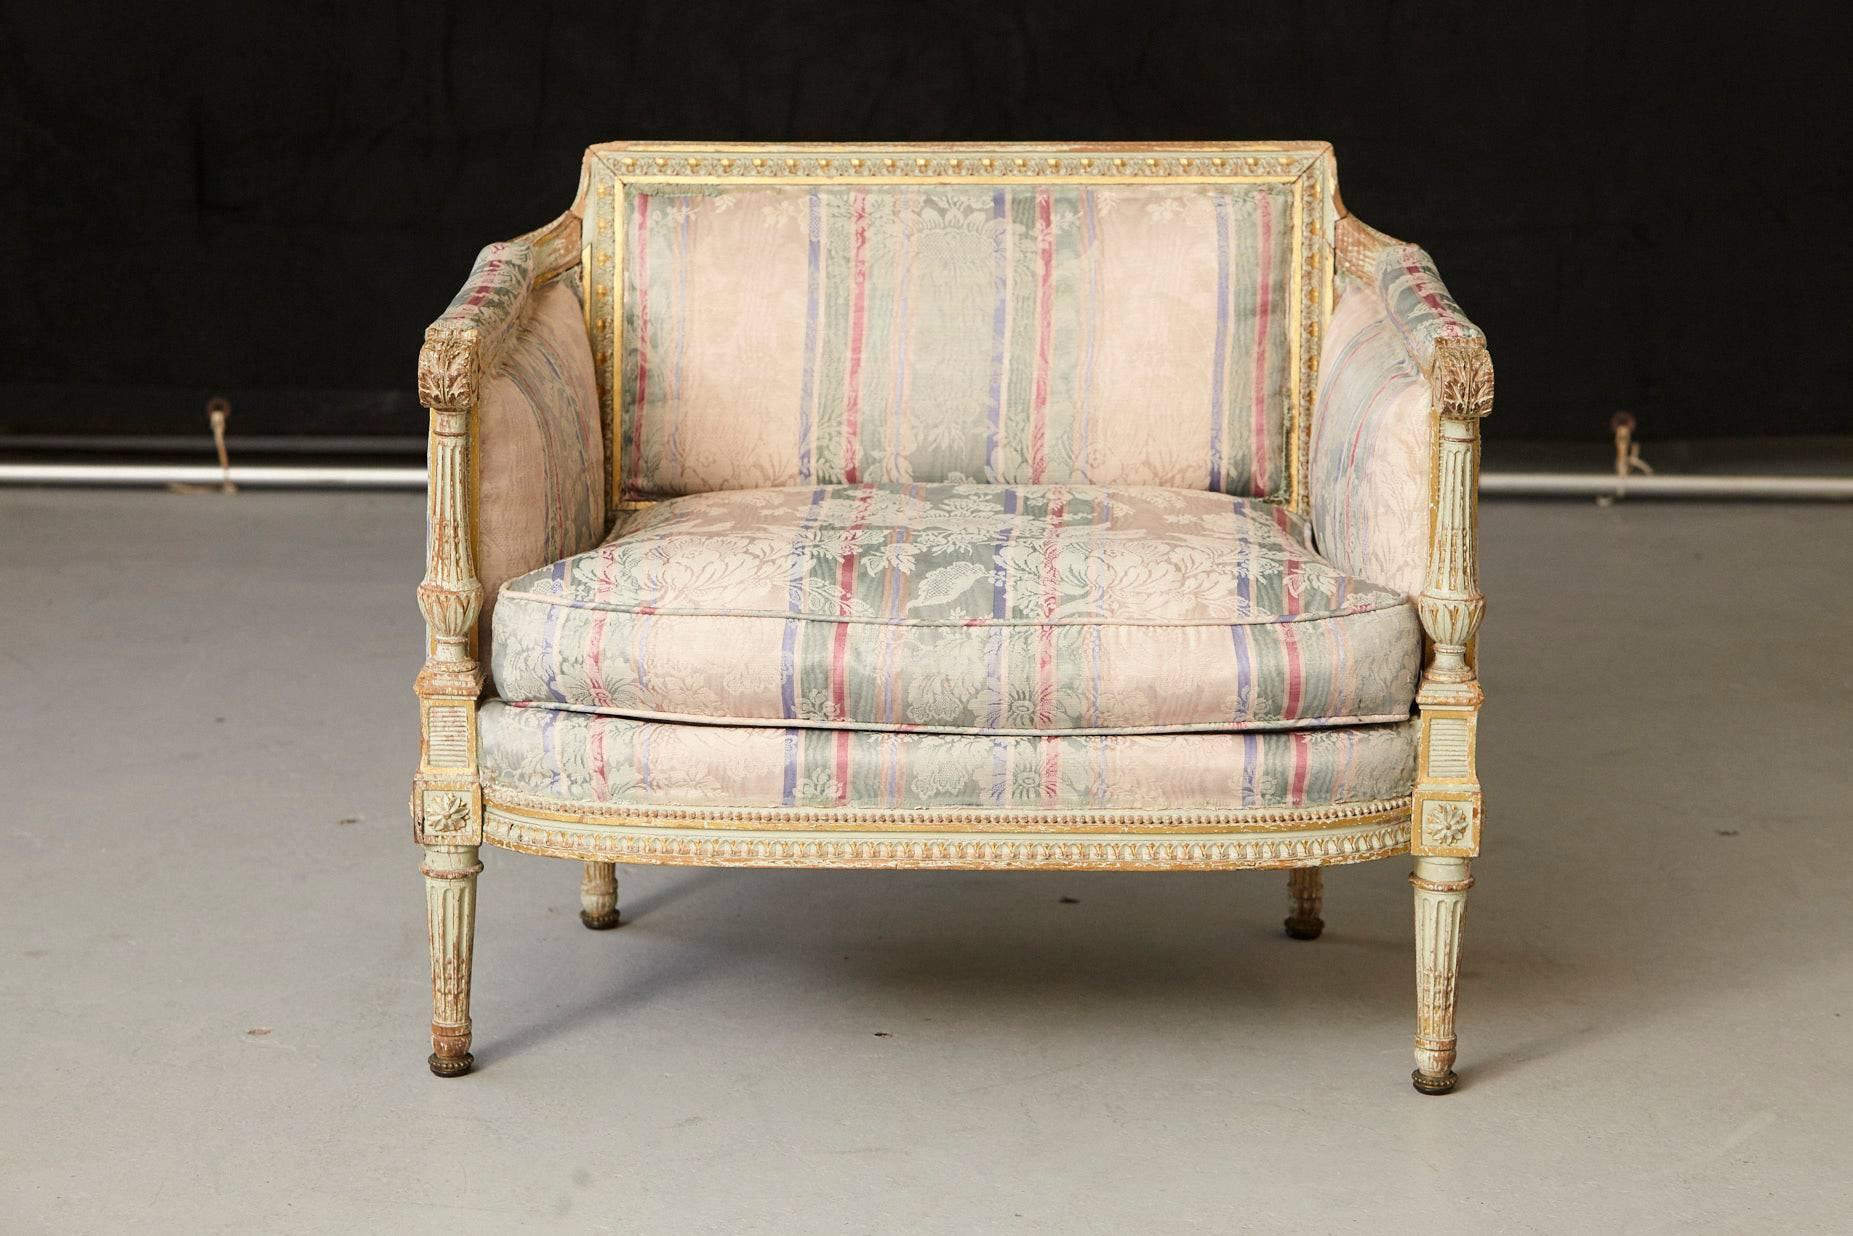 Beautiful French distressed paint and gild decorated fauteuil in the style of Louis XVI.
Some paint and gild loss, some cracks to frame, water and fading to upholstery,
please refer to the detailed pictures. 
Still a beautiful piece in it's as is